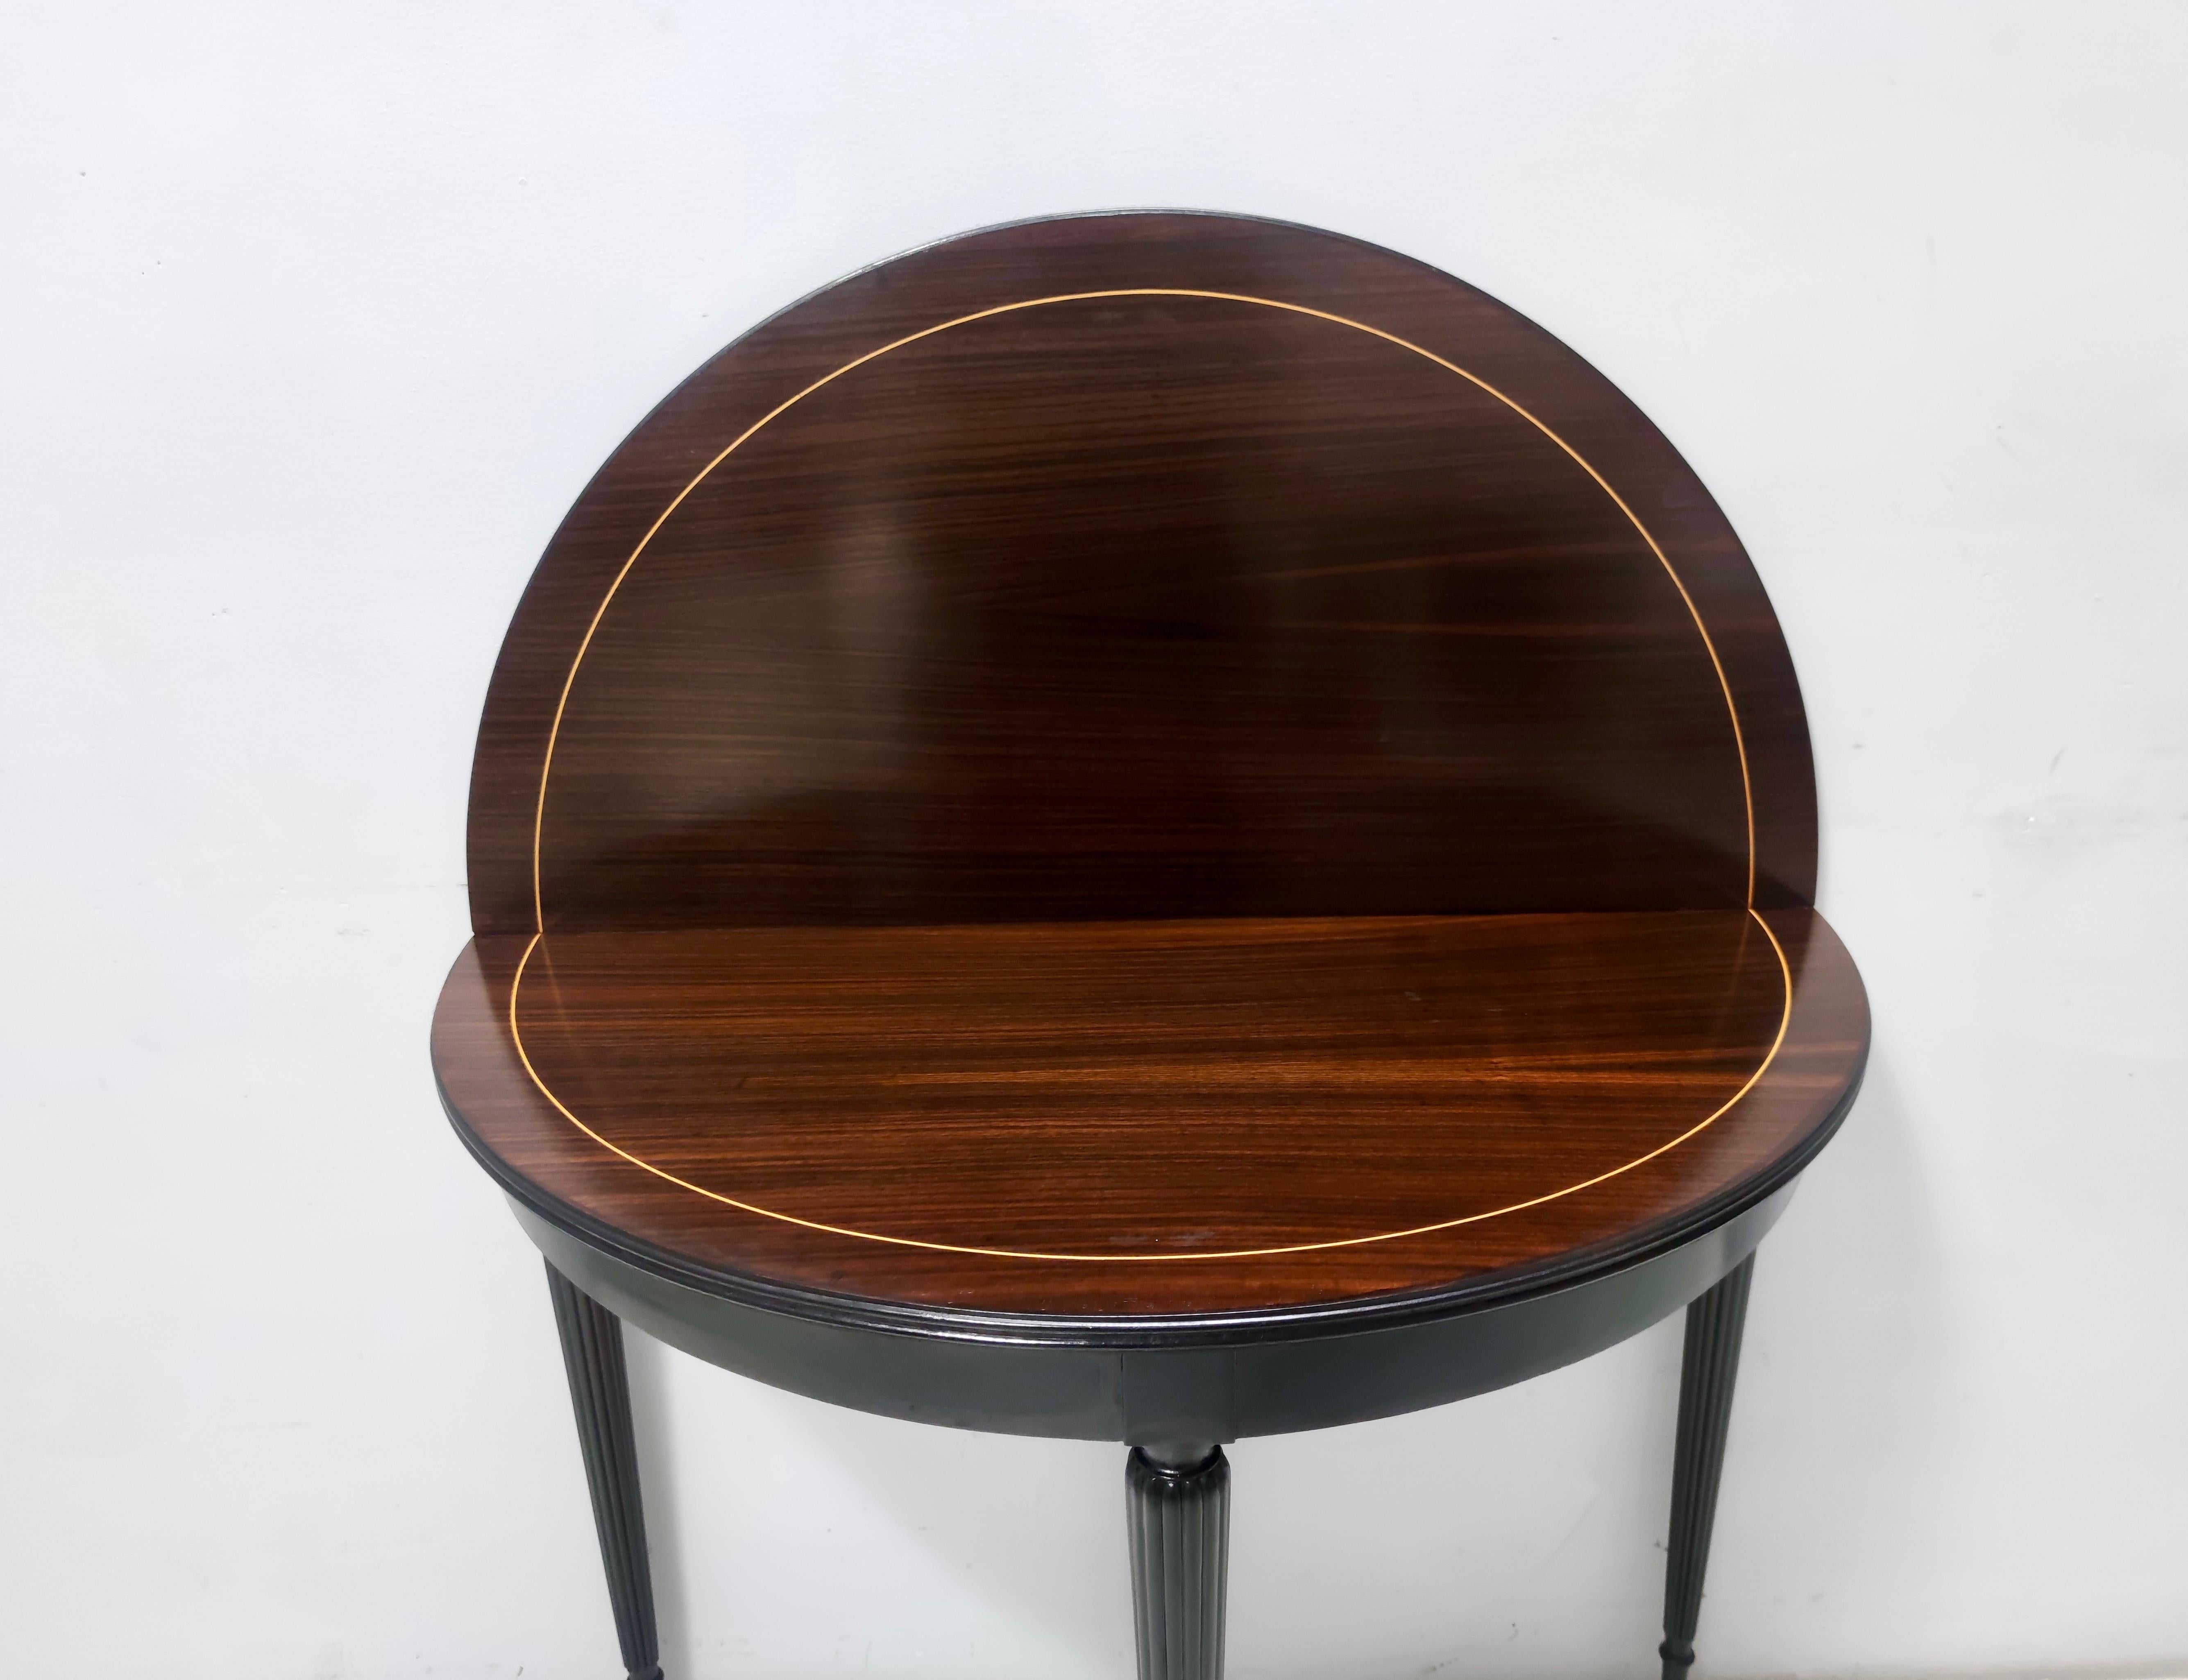 Made in Italy, 1960s. 
It features an ebonized beech and black walnut frame with brass feet caps. 
This round folding table / demilune console table is ascribable to Paolo Buffa and has been recently restored. 
It is a vintage piece, therefore it